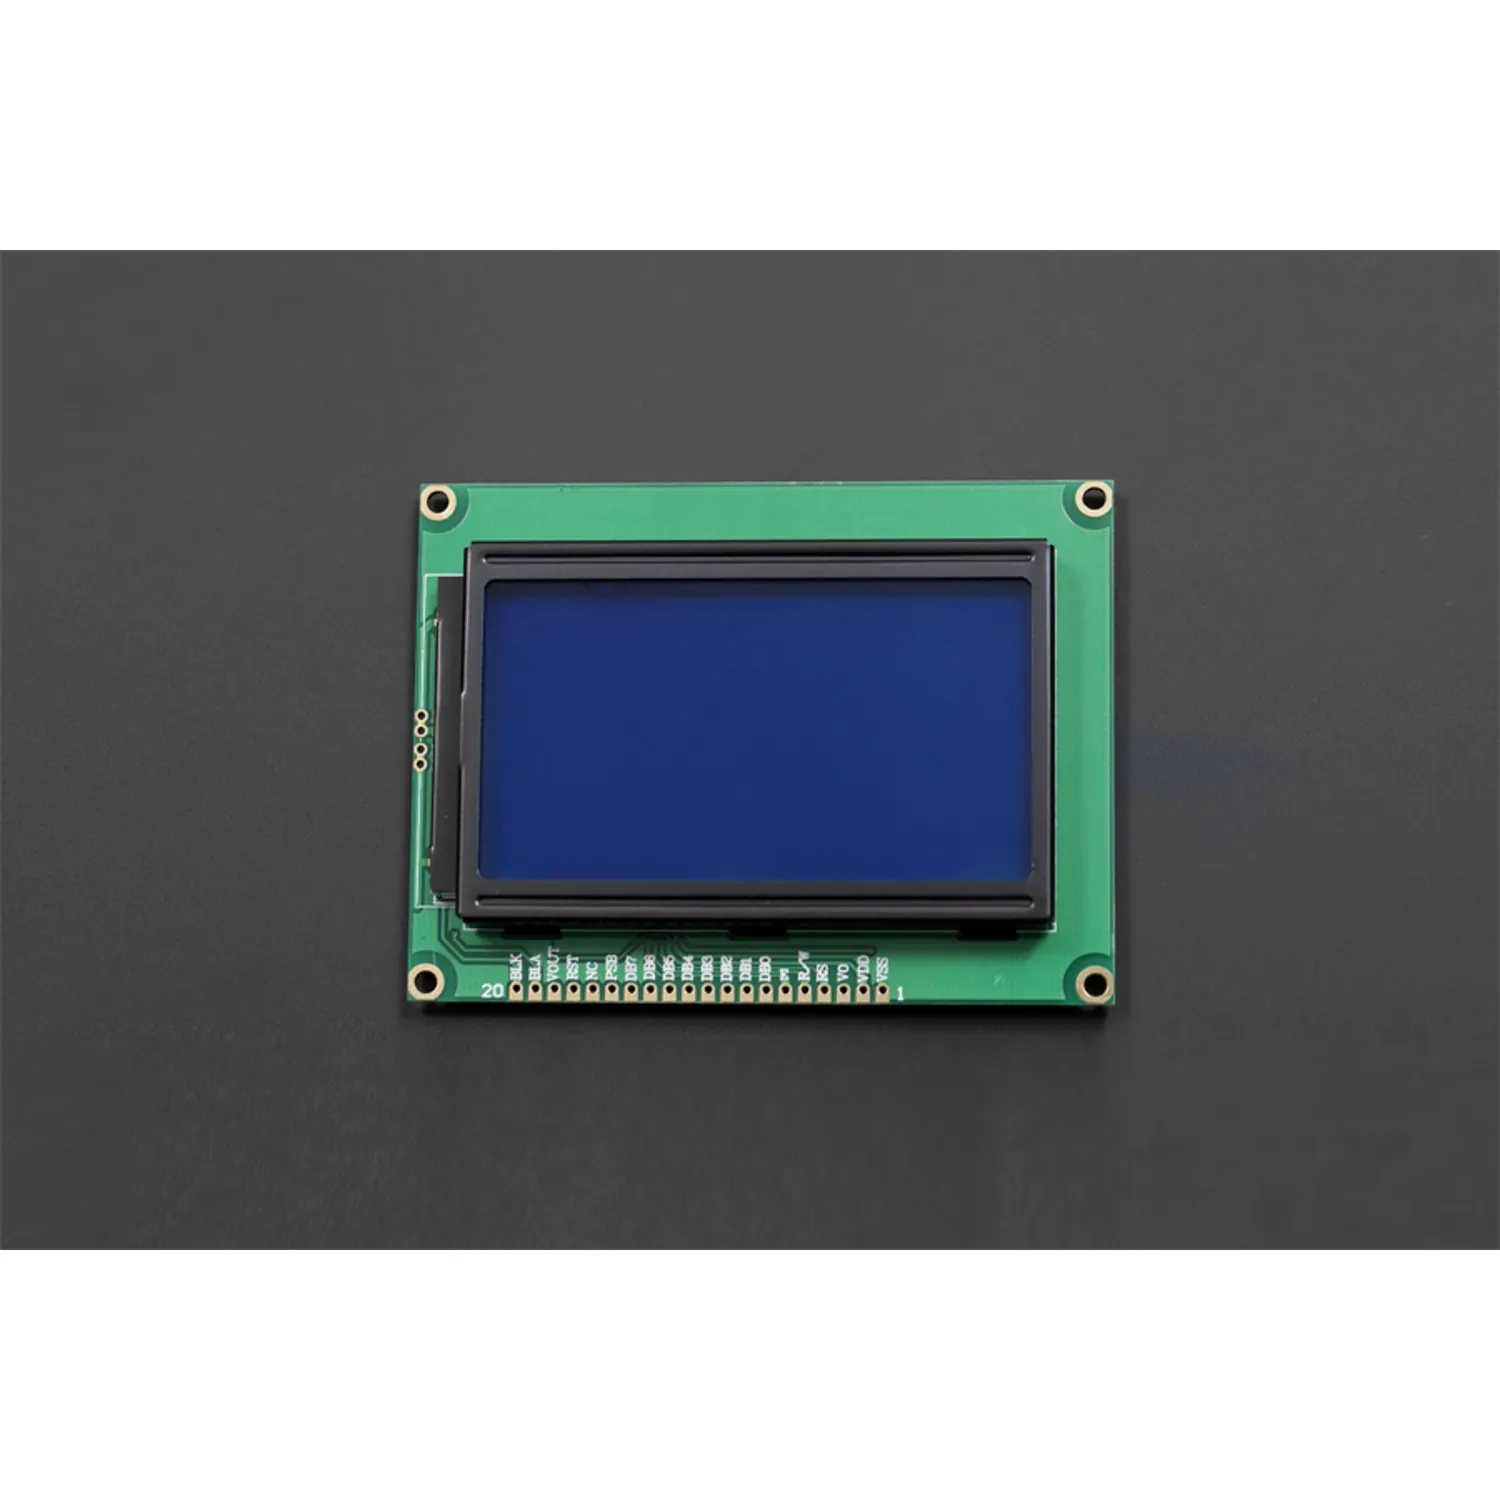 Photo of 128x64 Graphic LCD